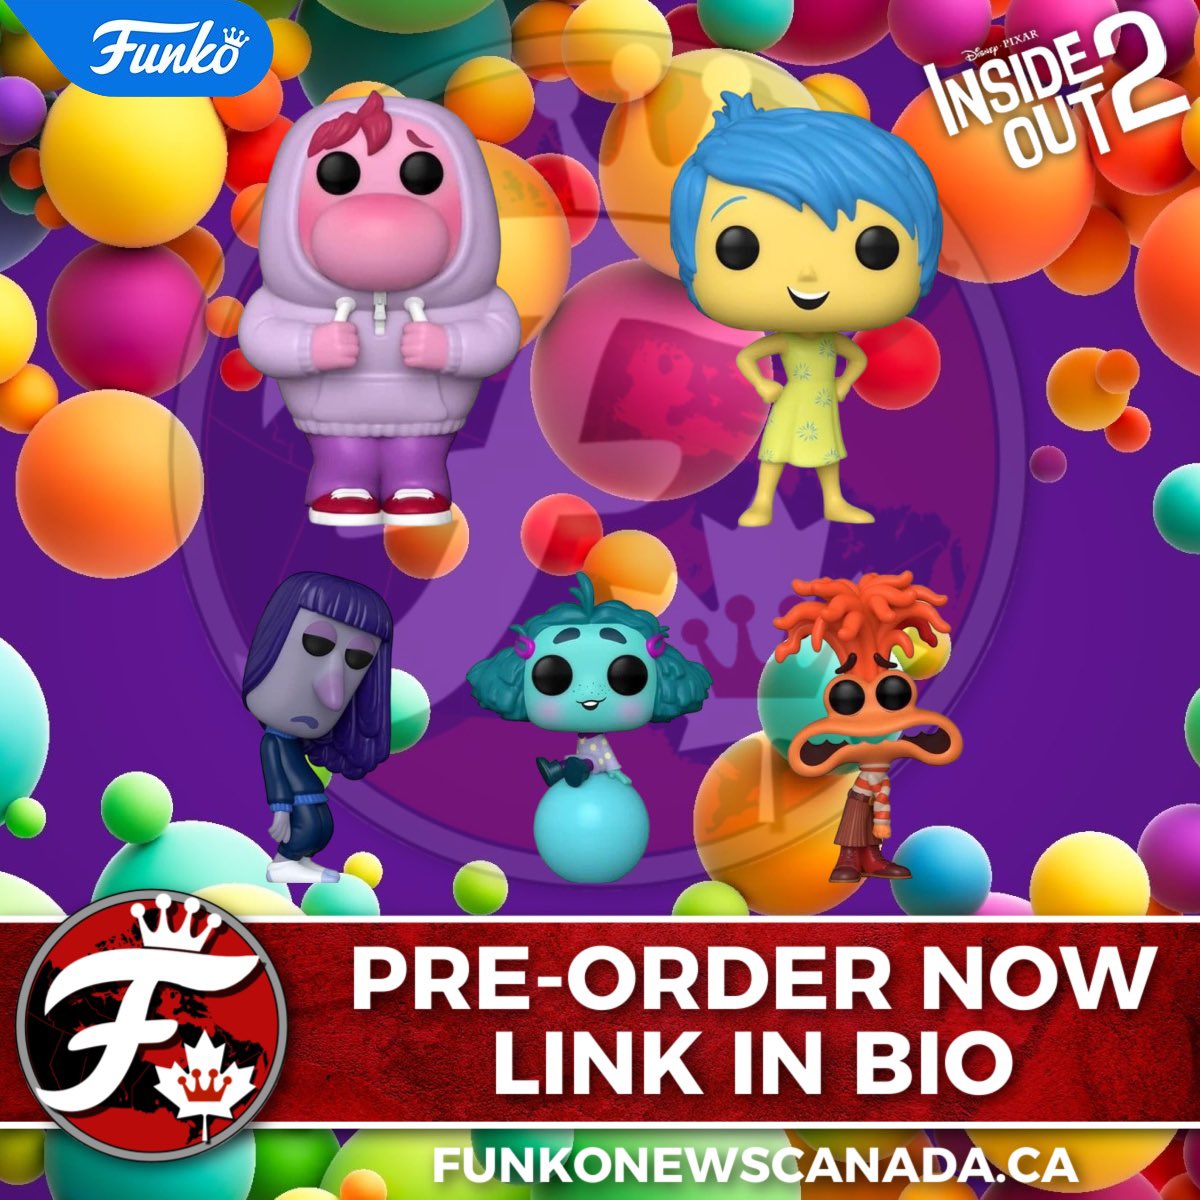 Coming Soon to Your Local Funko Retailer:

Funko Pop! Disney: Pixar’s Inside Out 2

Amazon CA:
amzn.to/3JHktpv

Amazon US:
amzn.to/3wee3v6

Note: Pictures will update once loaded 
 
#nerdlife #vinylfigures #funkocommunity #funkocollector #toycommunity…